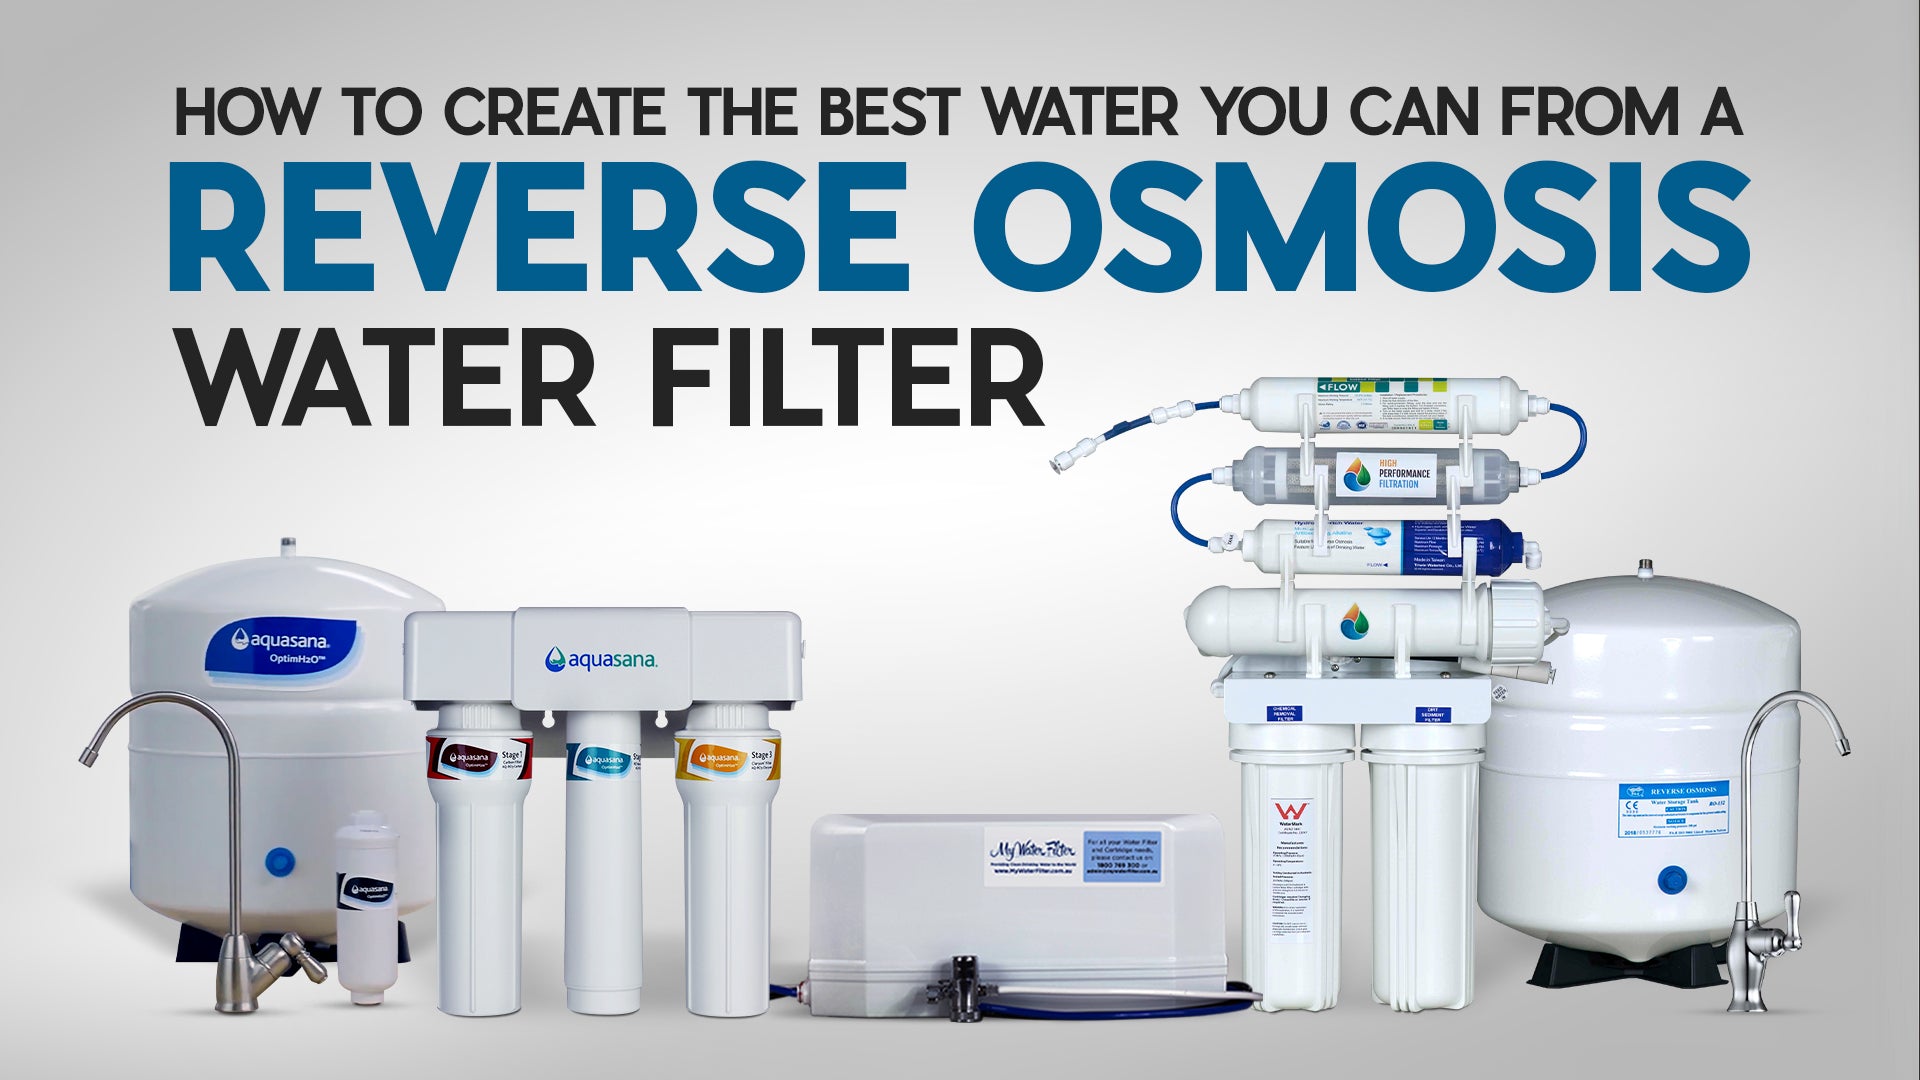 How to Create the Best Water you can from a Reverse Osmosis Water Filter